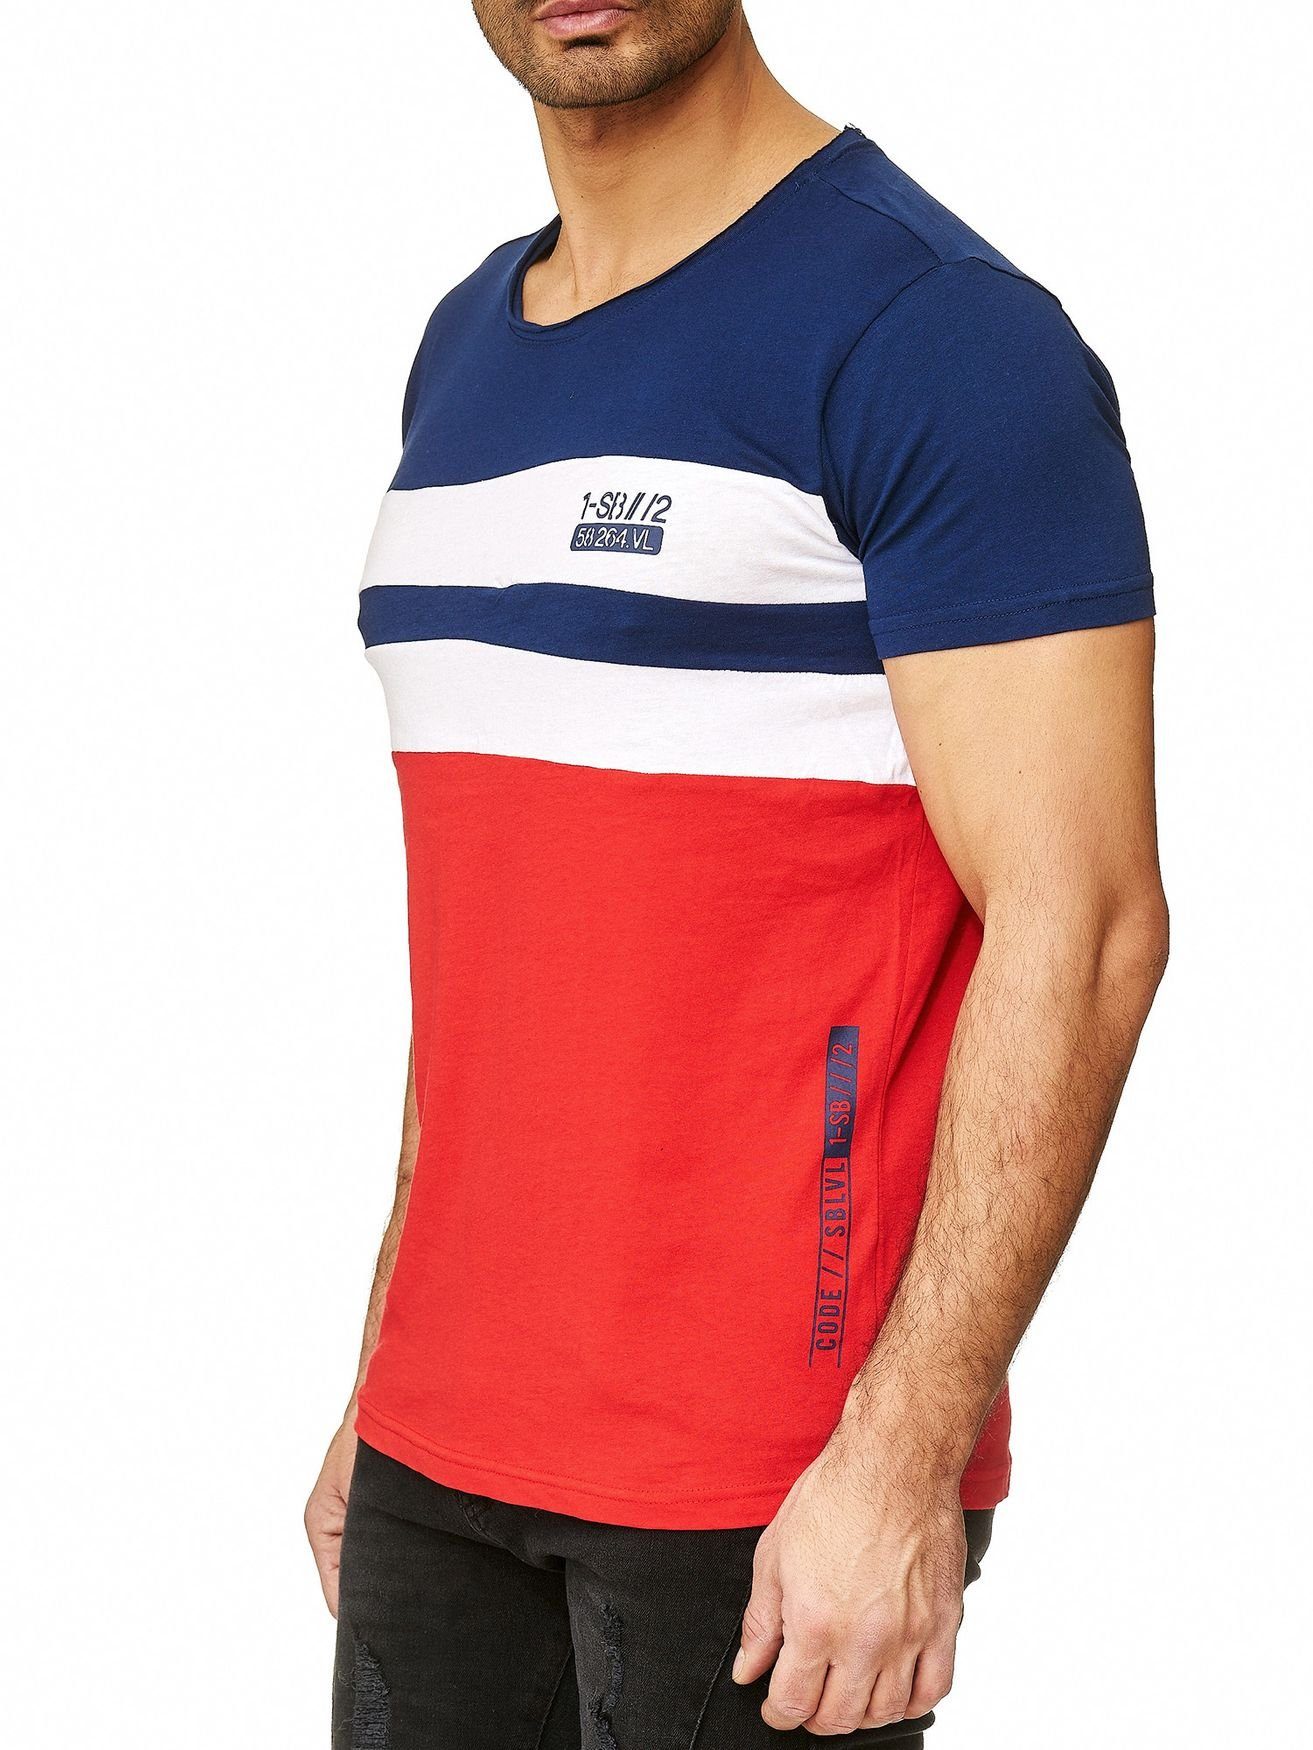 T-Shirt T-Shirt in Streifen Farbig 2670 Colorblock O-Neck (1-tlg) SUBLEVEL Rot